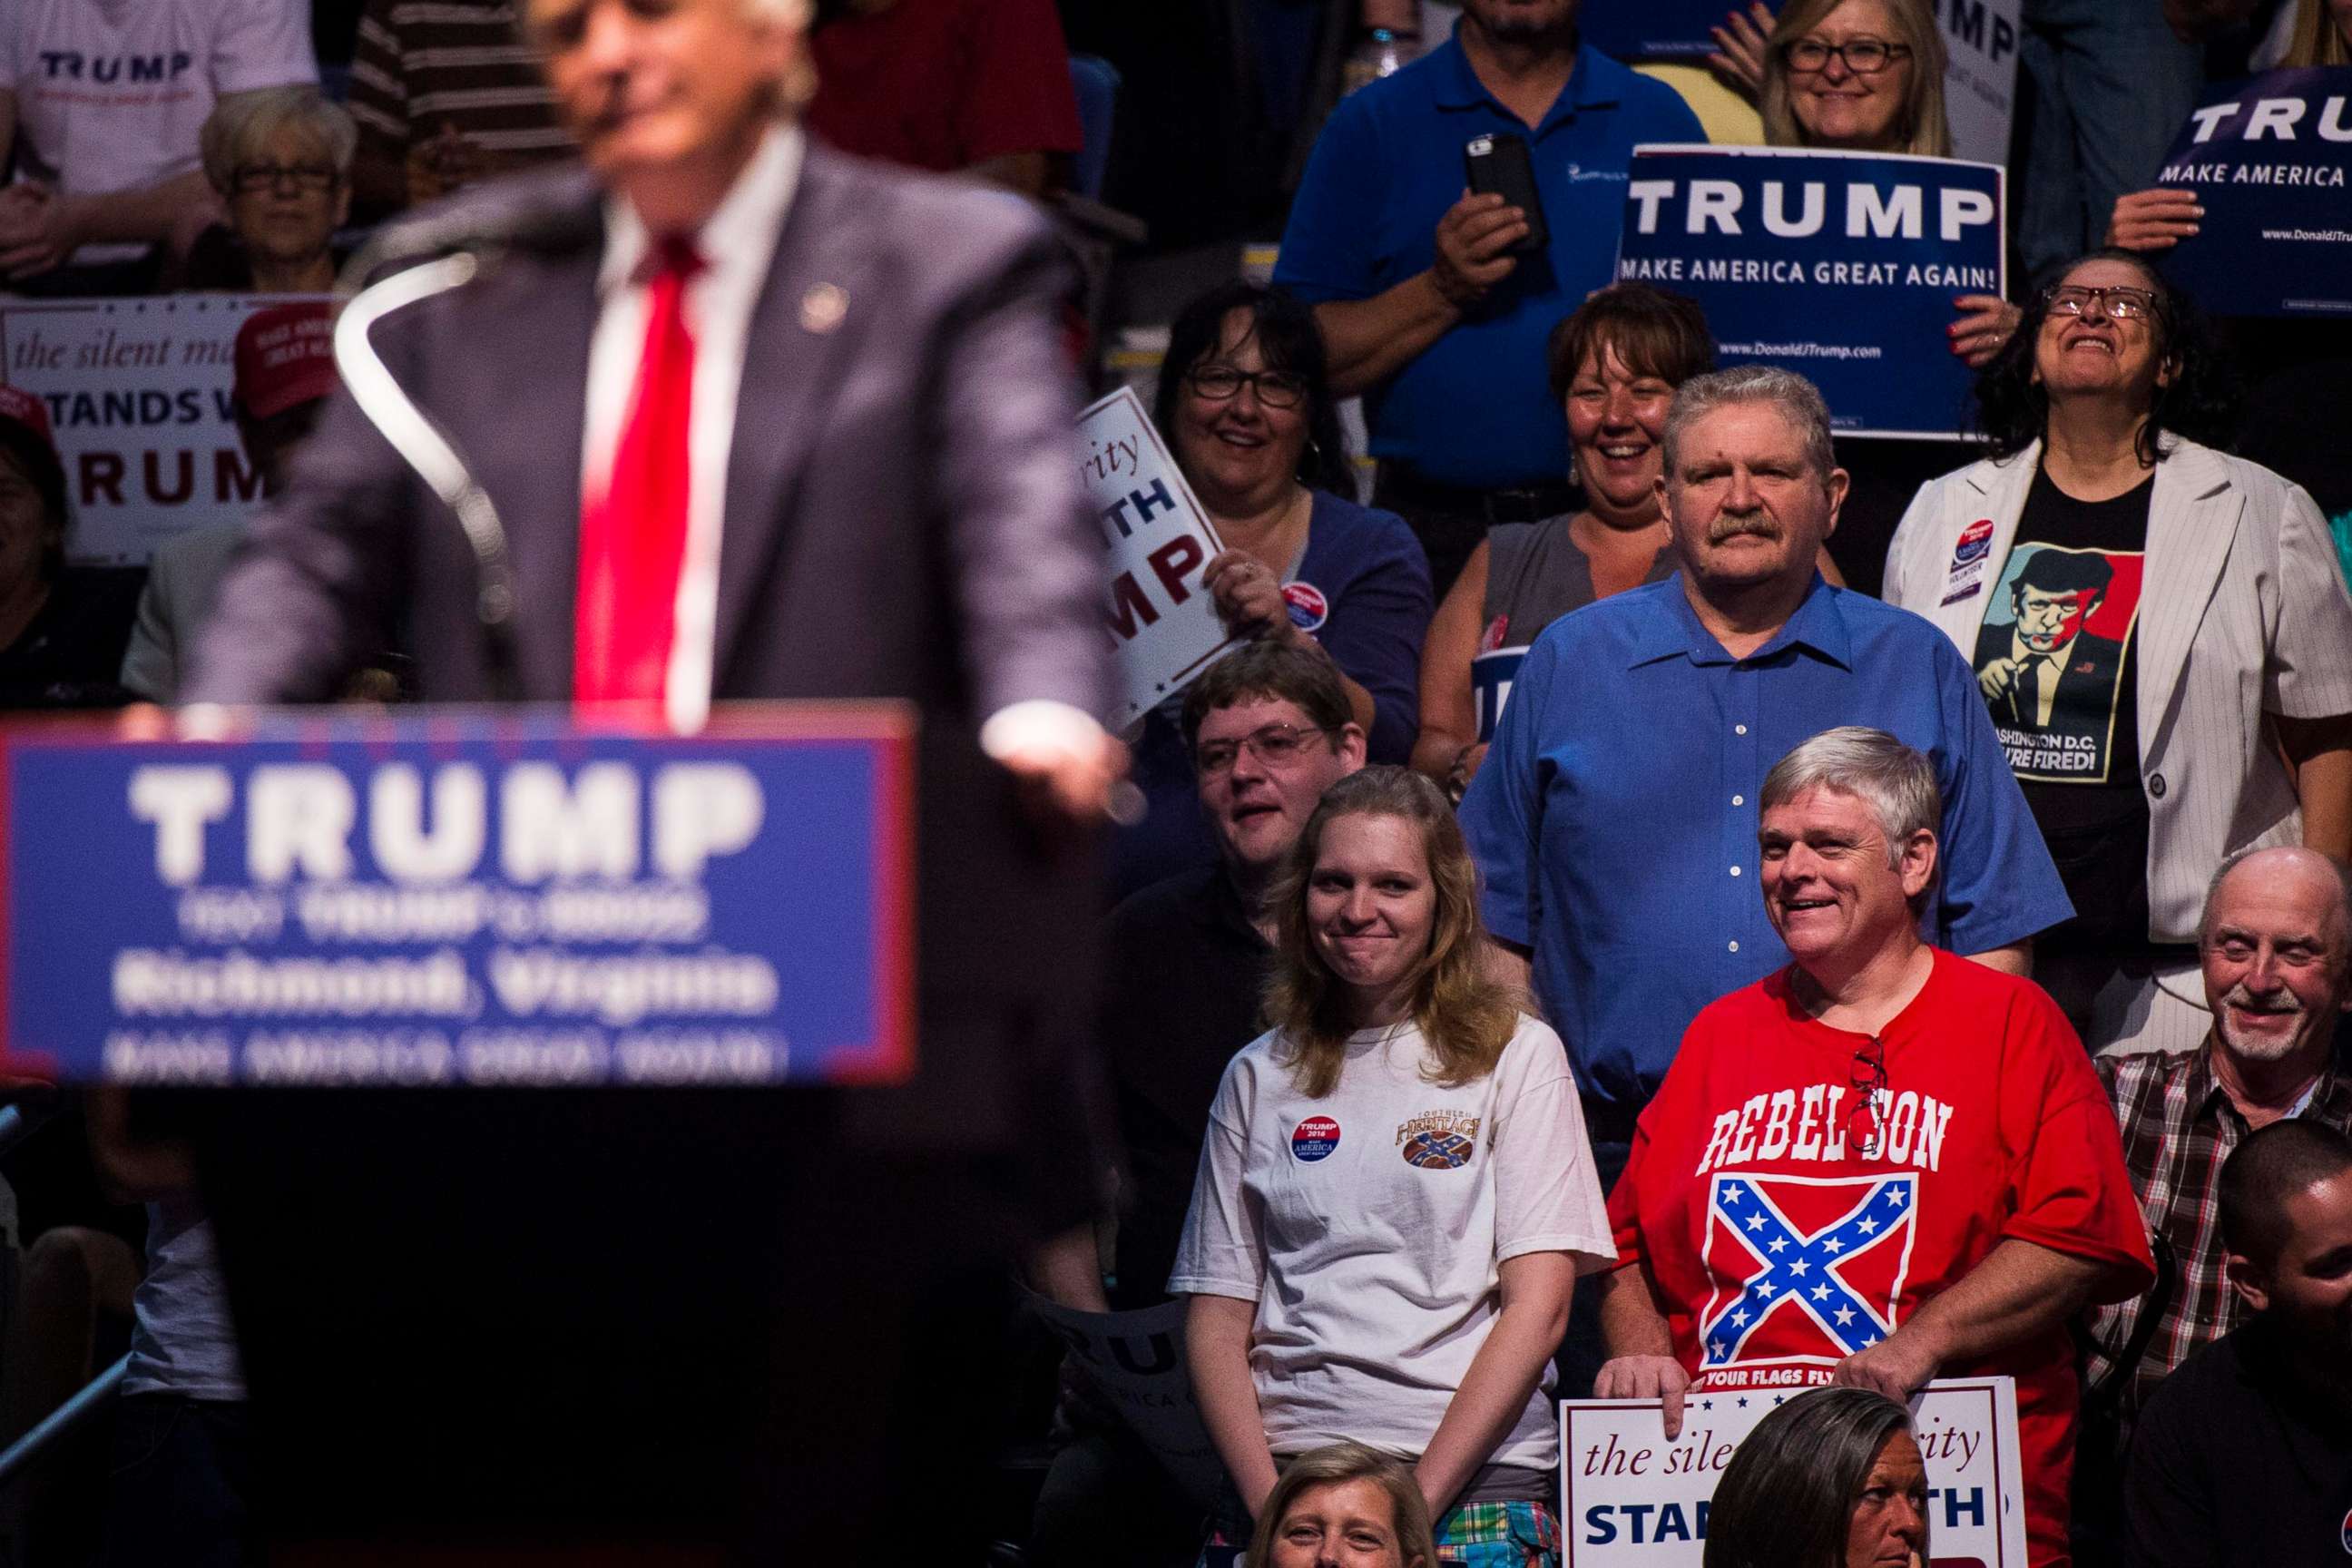 PHOTO: A man wears a shirt with a confederate flag on it as Republican Presidential candidate Donald Trump speaks during a rally at the Richmond Coliseum in Richmond, Va., June 10, 2016. 